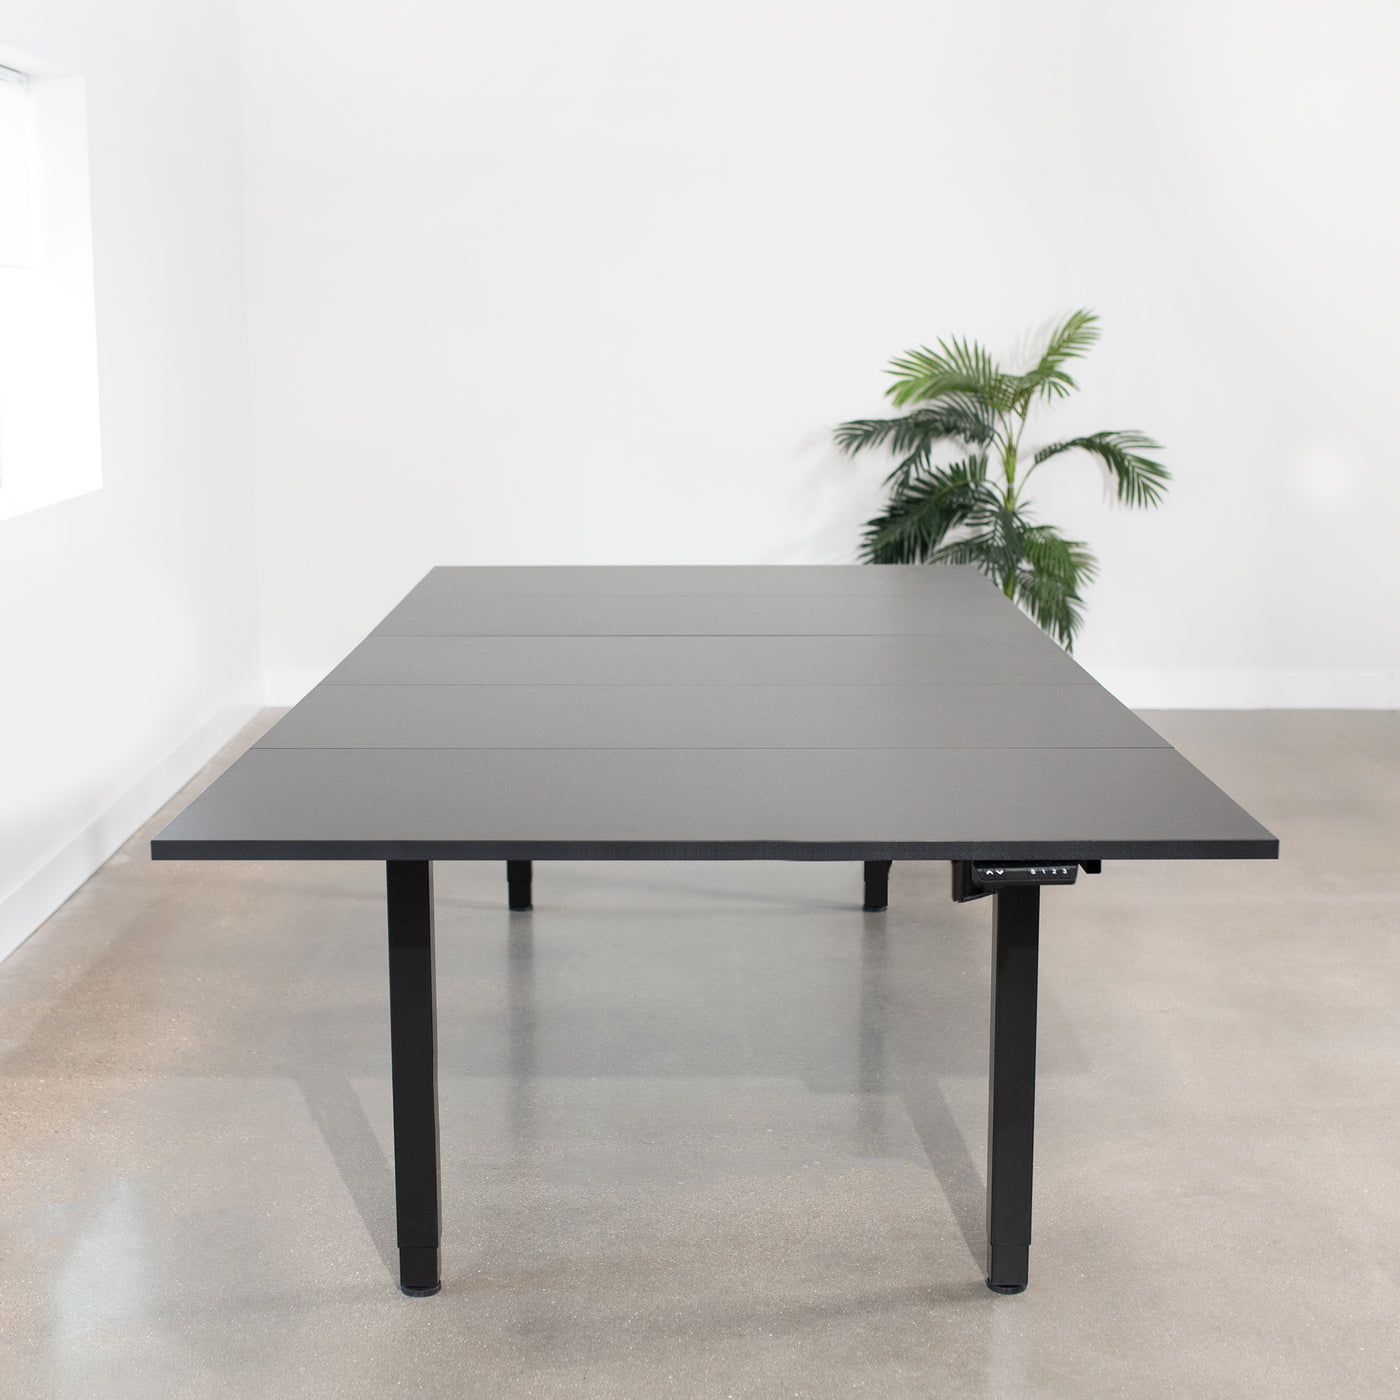 118" x 55" Dual Motor Electric 4-Leg Desk with Square Corner Top is an extra large height adjustable desk perfect for a conference room table or project workstation setup.